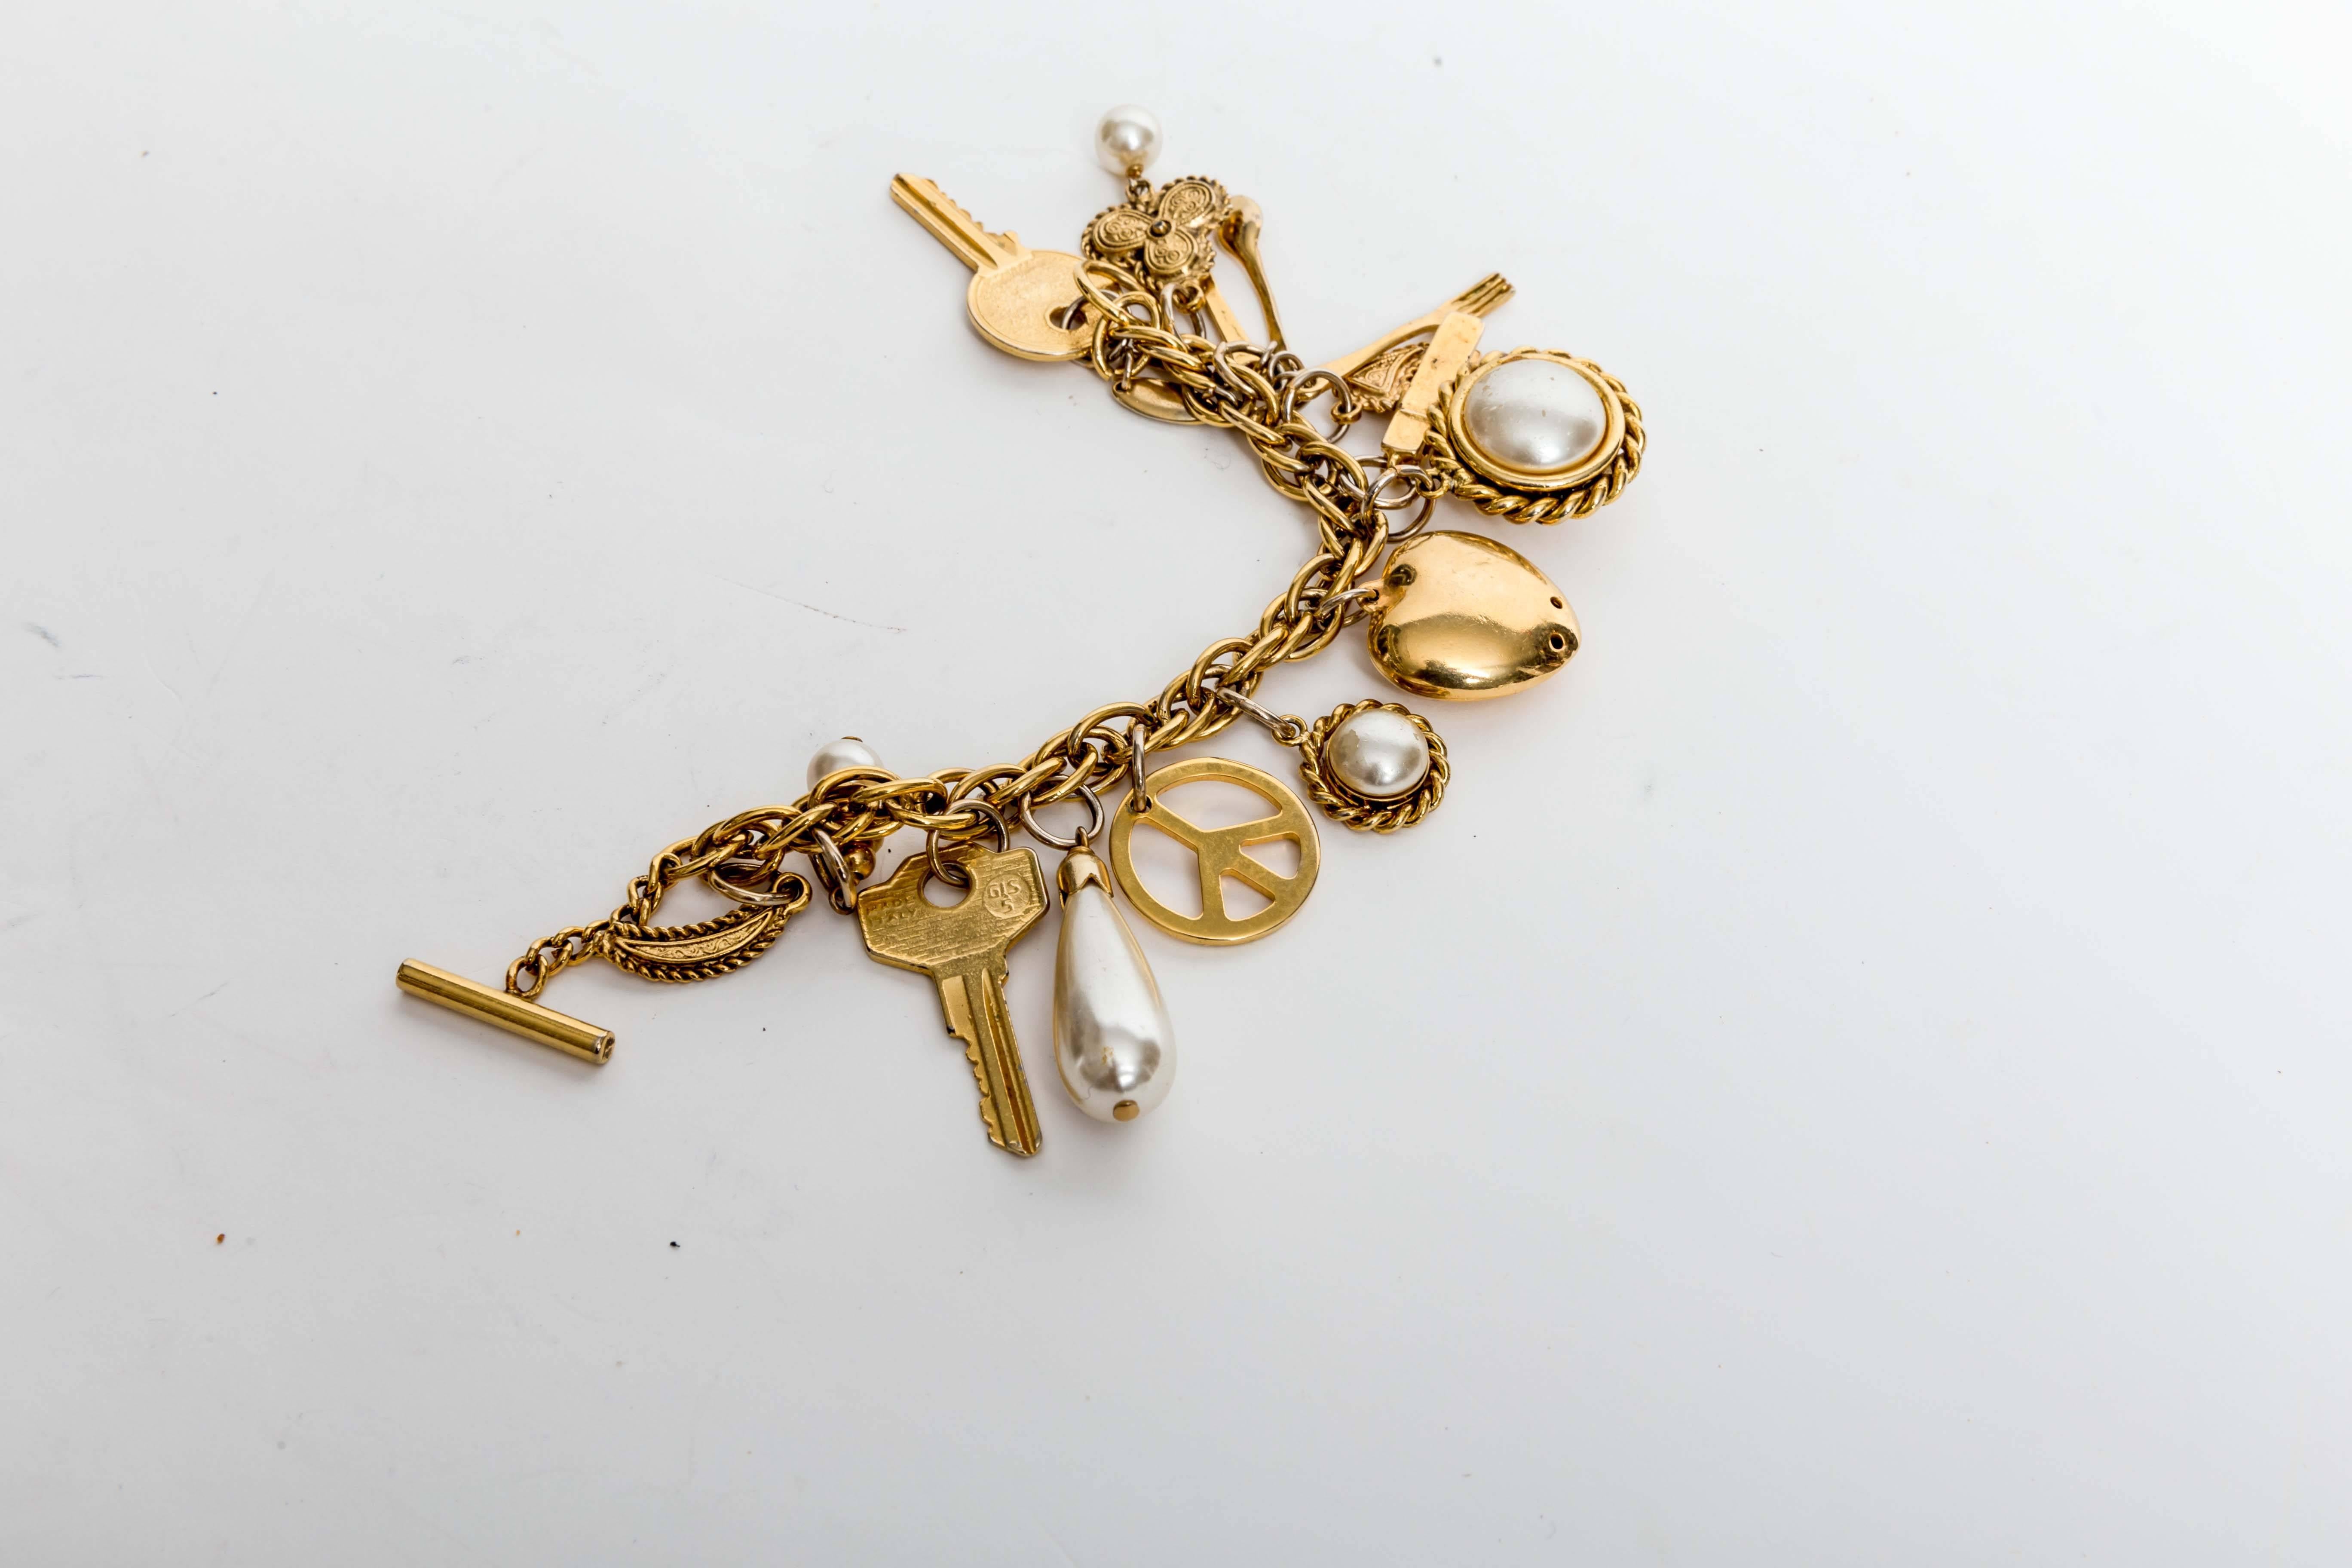 Moschino Charm Bracelet In Good Condition For Sale In Westhampton Beach, NY